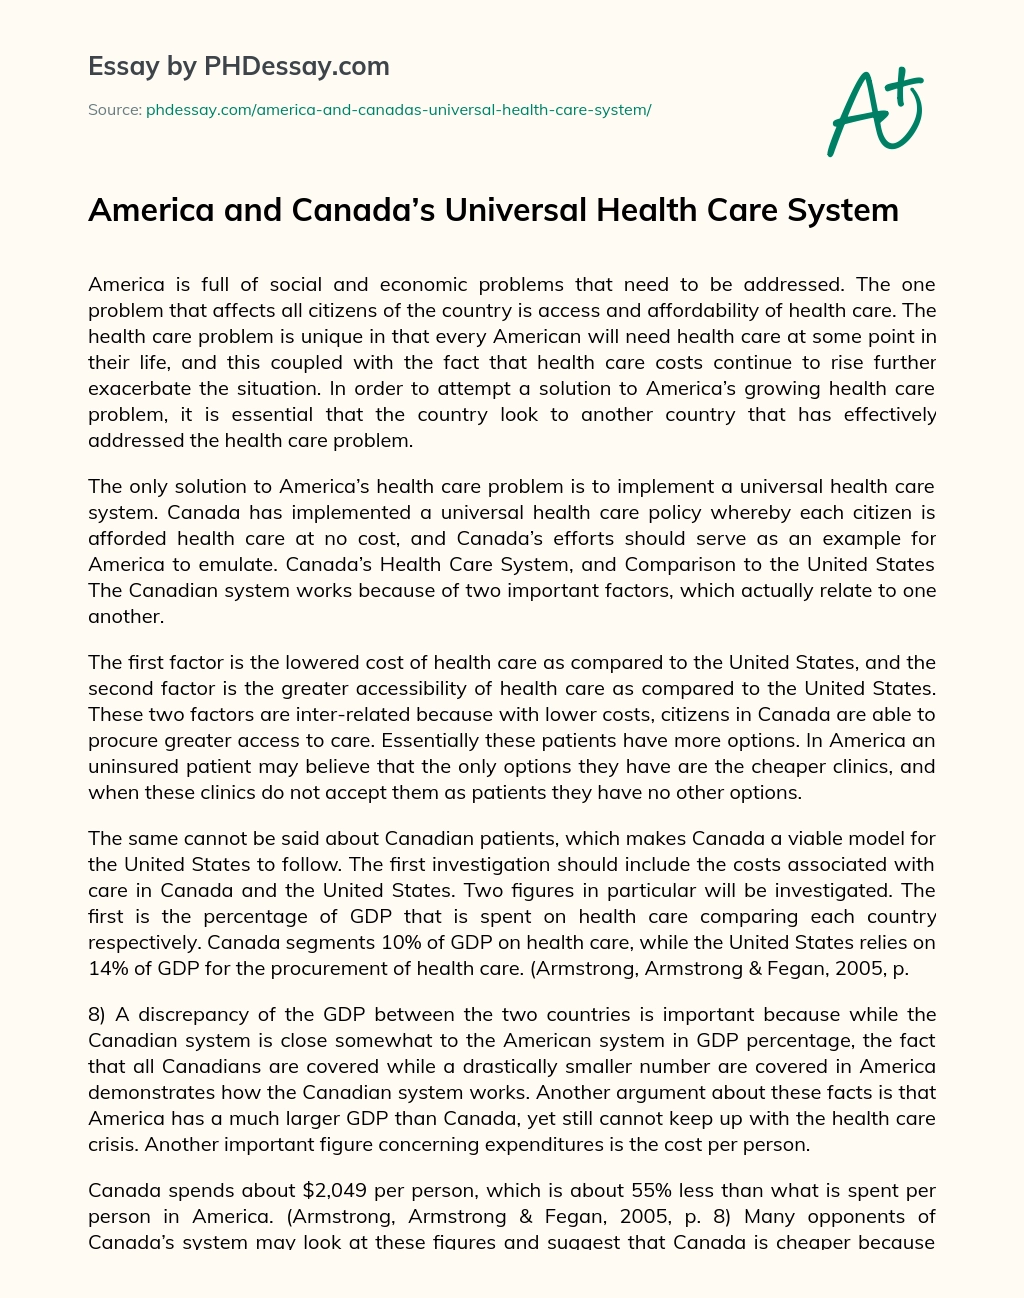 America and Canada’s Universal Health Care System essay